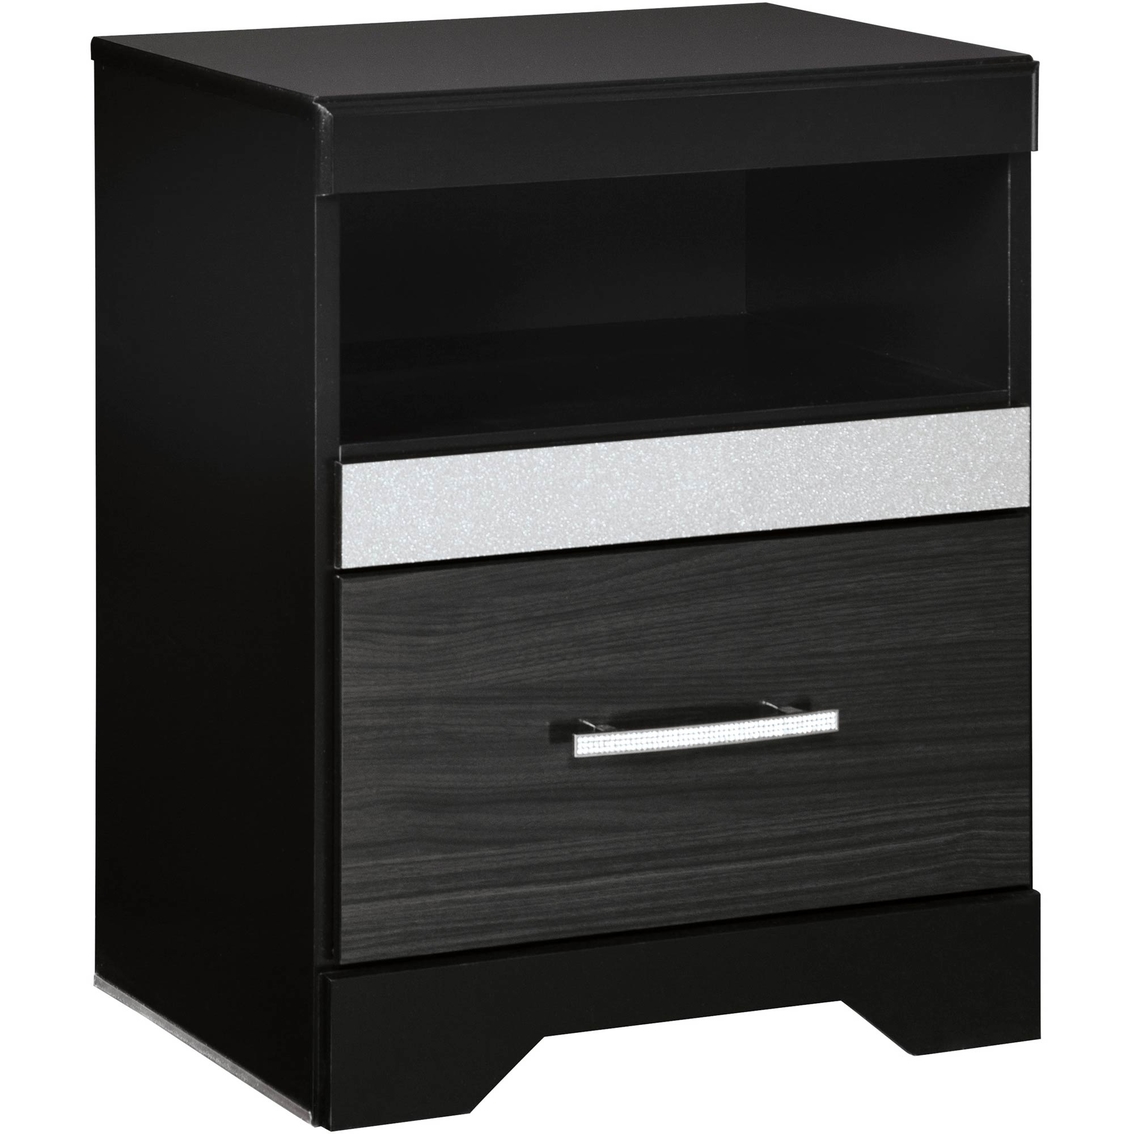 Signature Design by Ashley Starberry Night Stand - Image 2 of 4